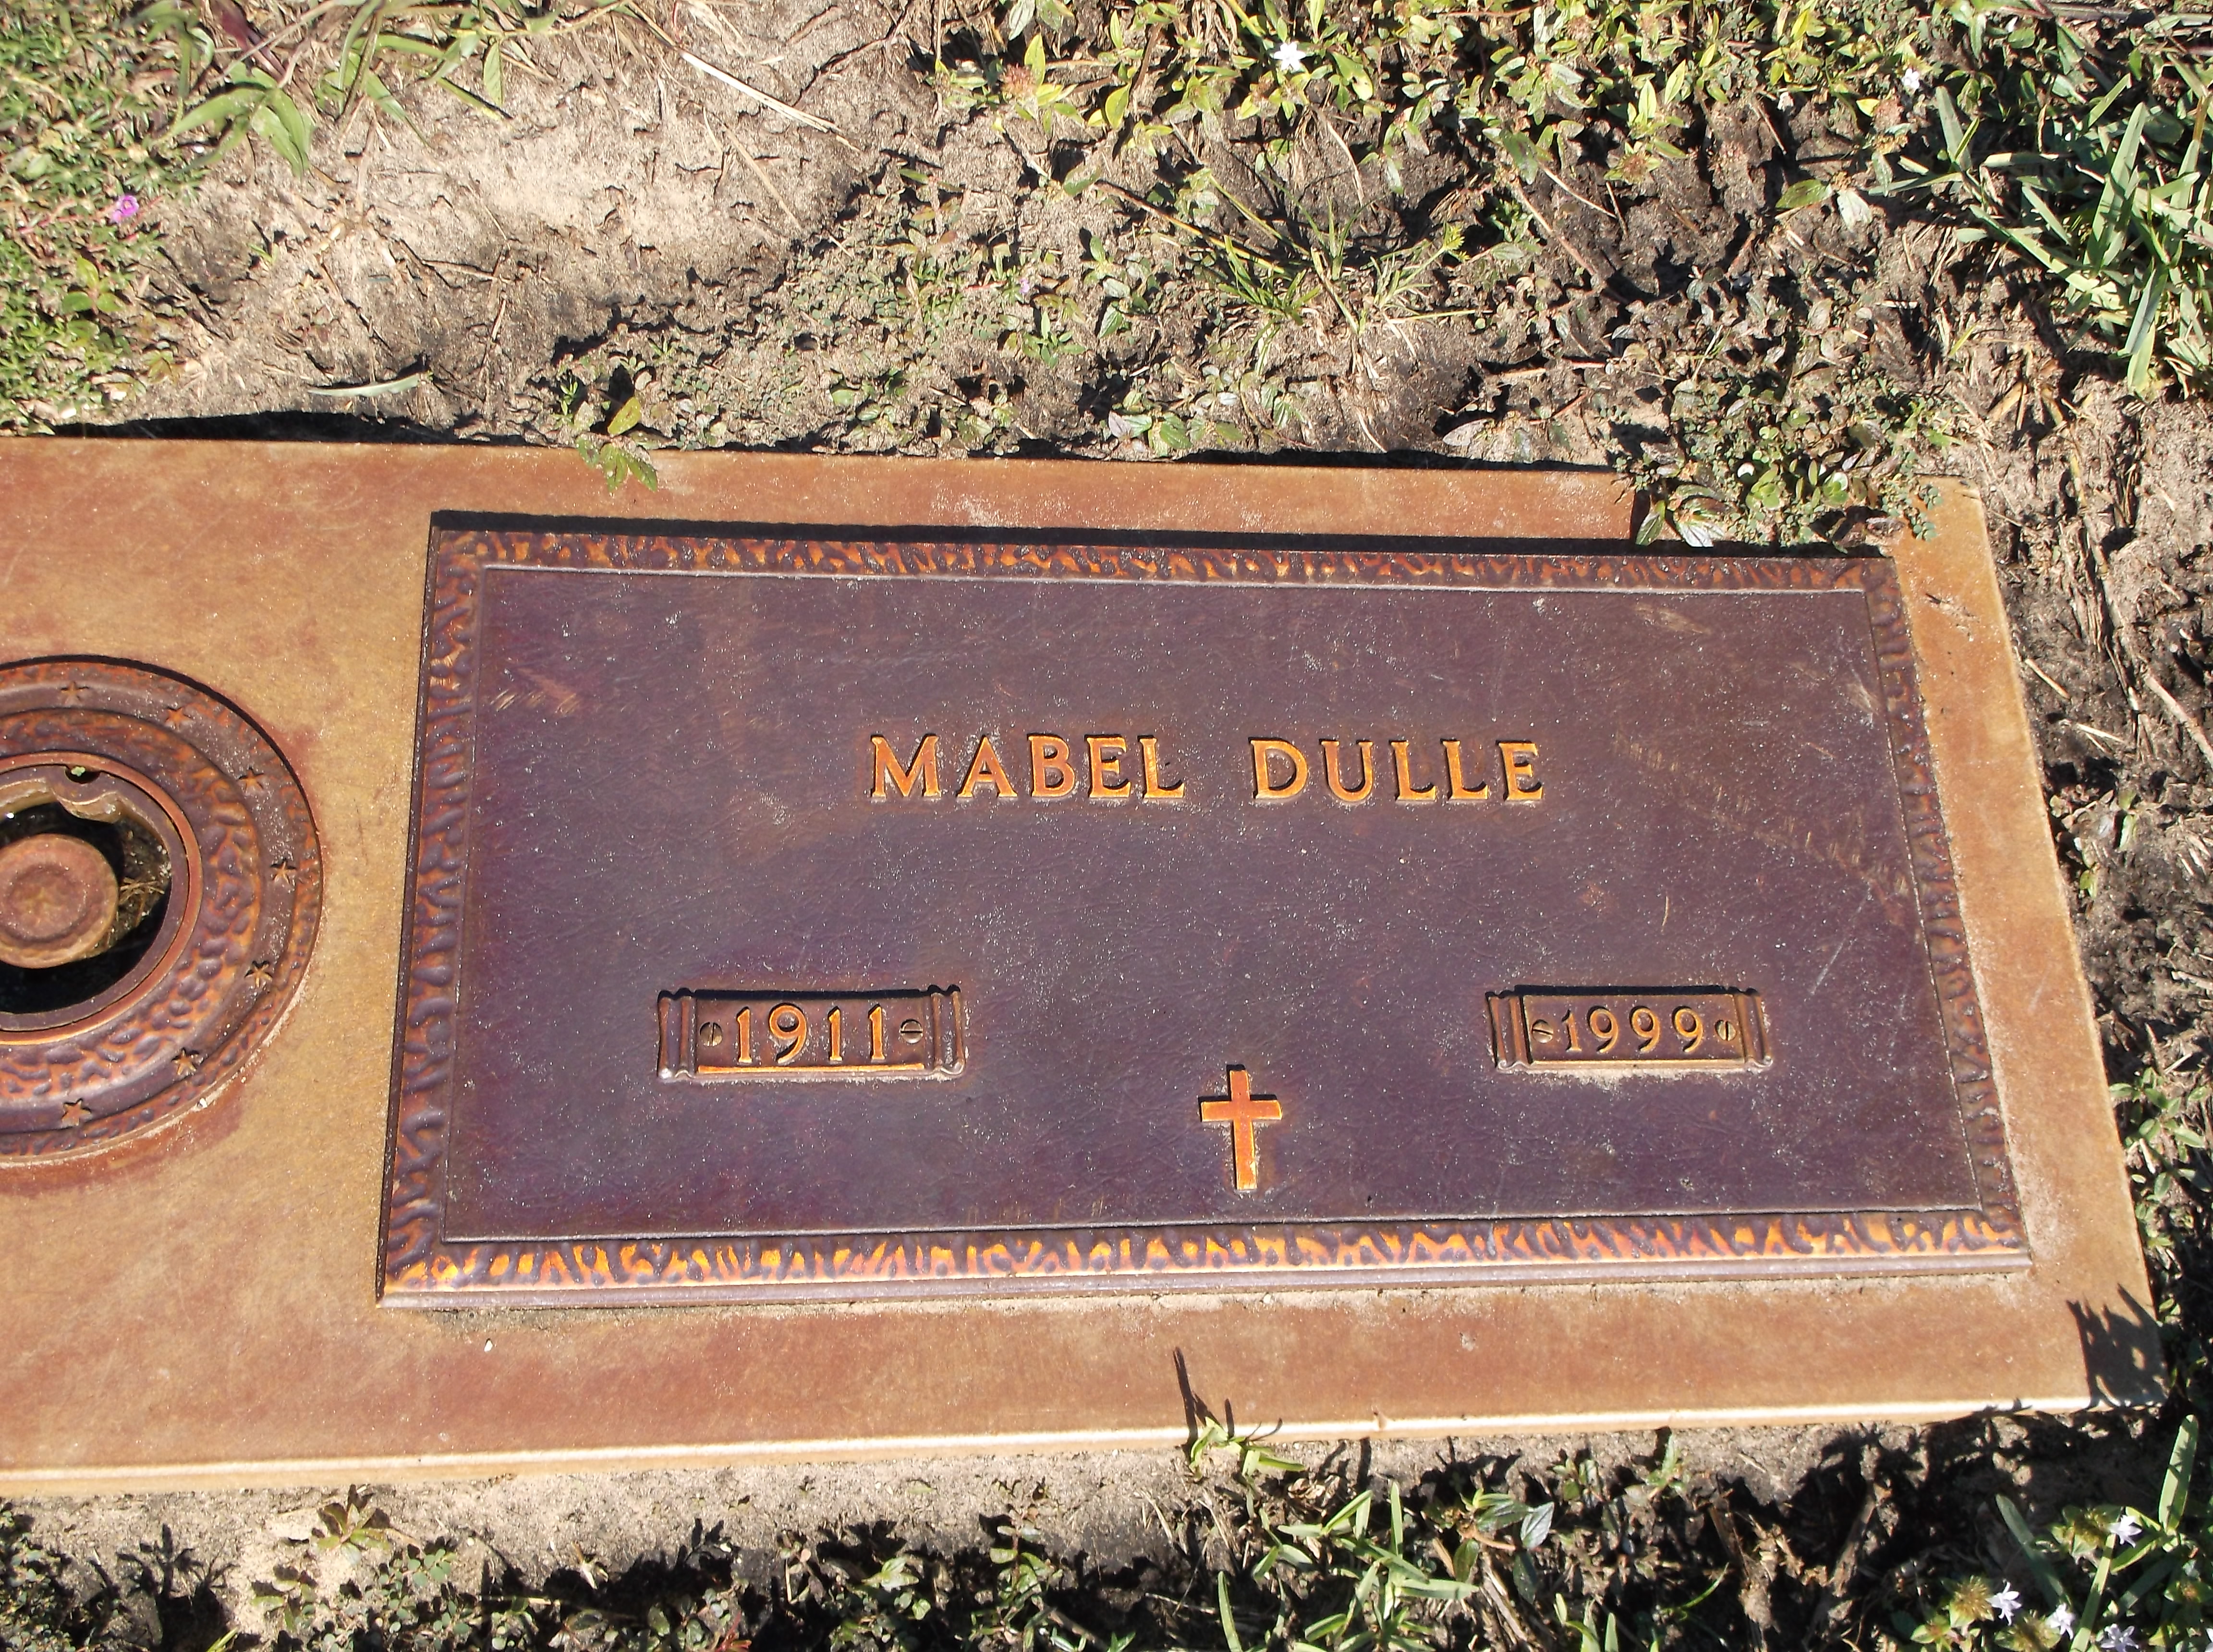 Mabel Dulle